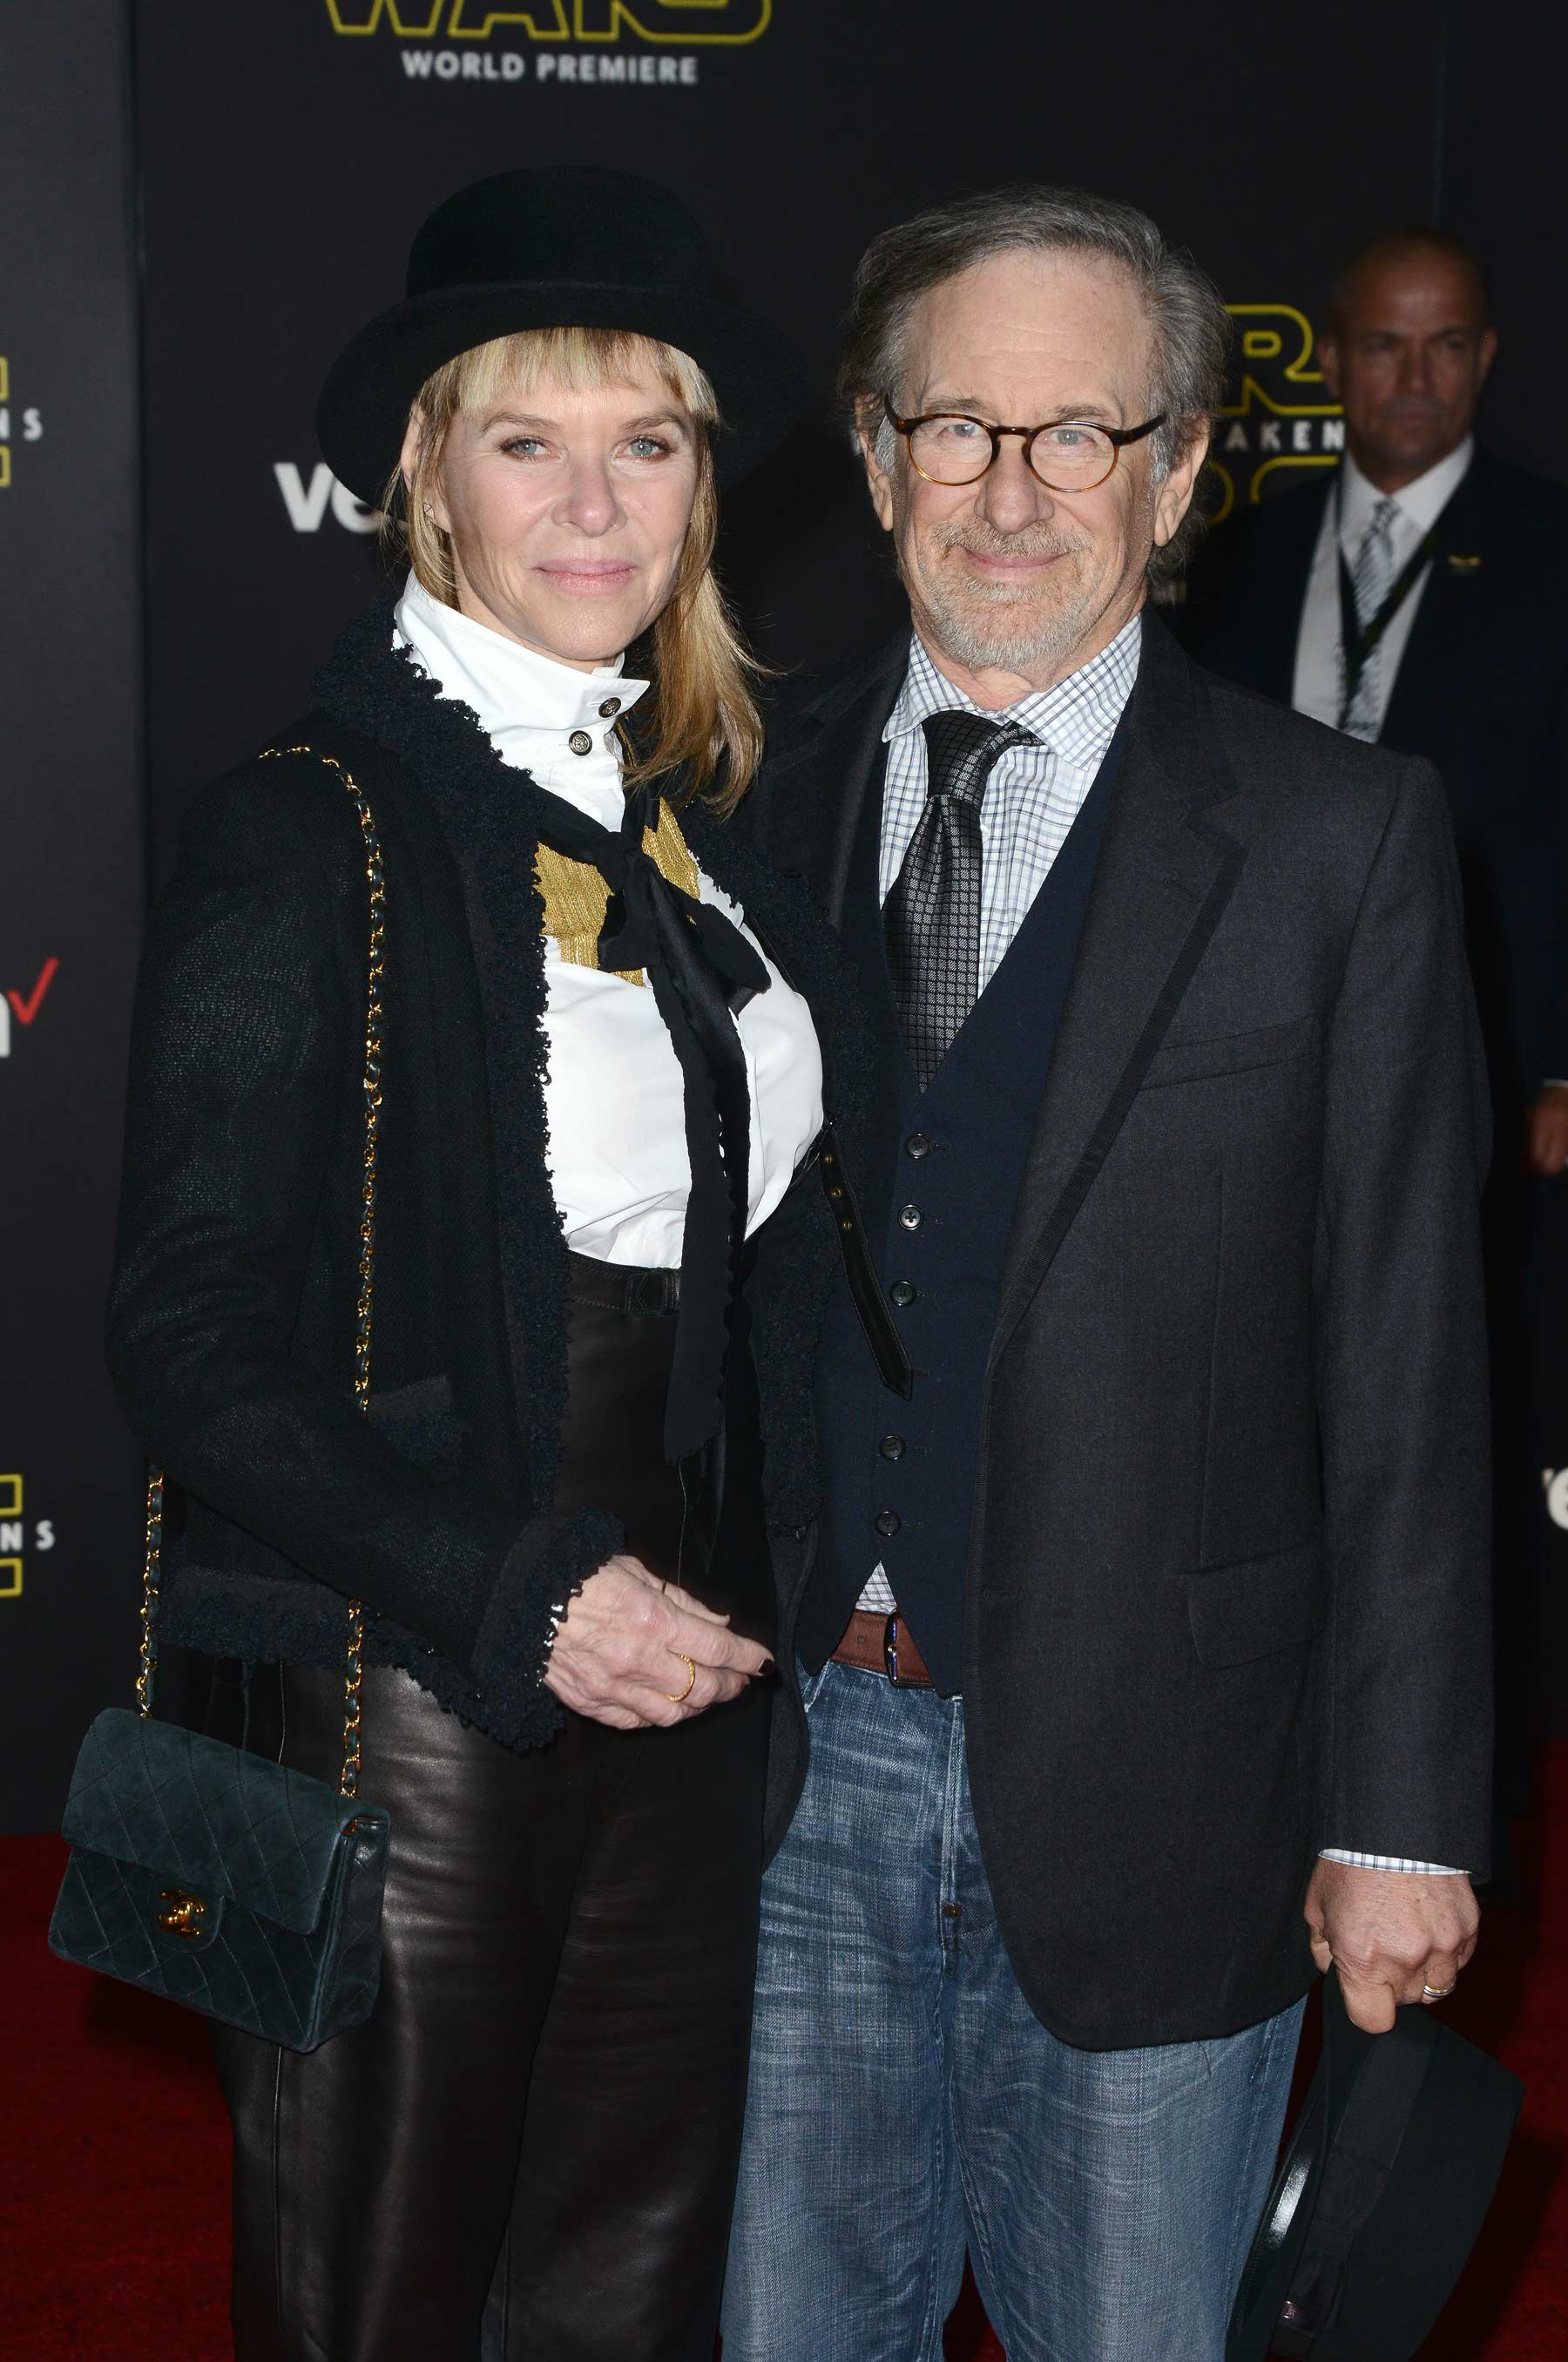 Kate Capshaw attends Star Wars: The Force Awakens World Premiere